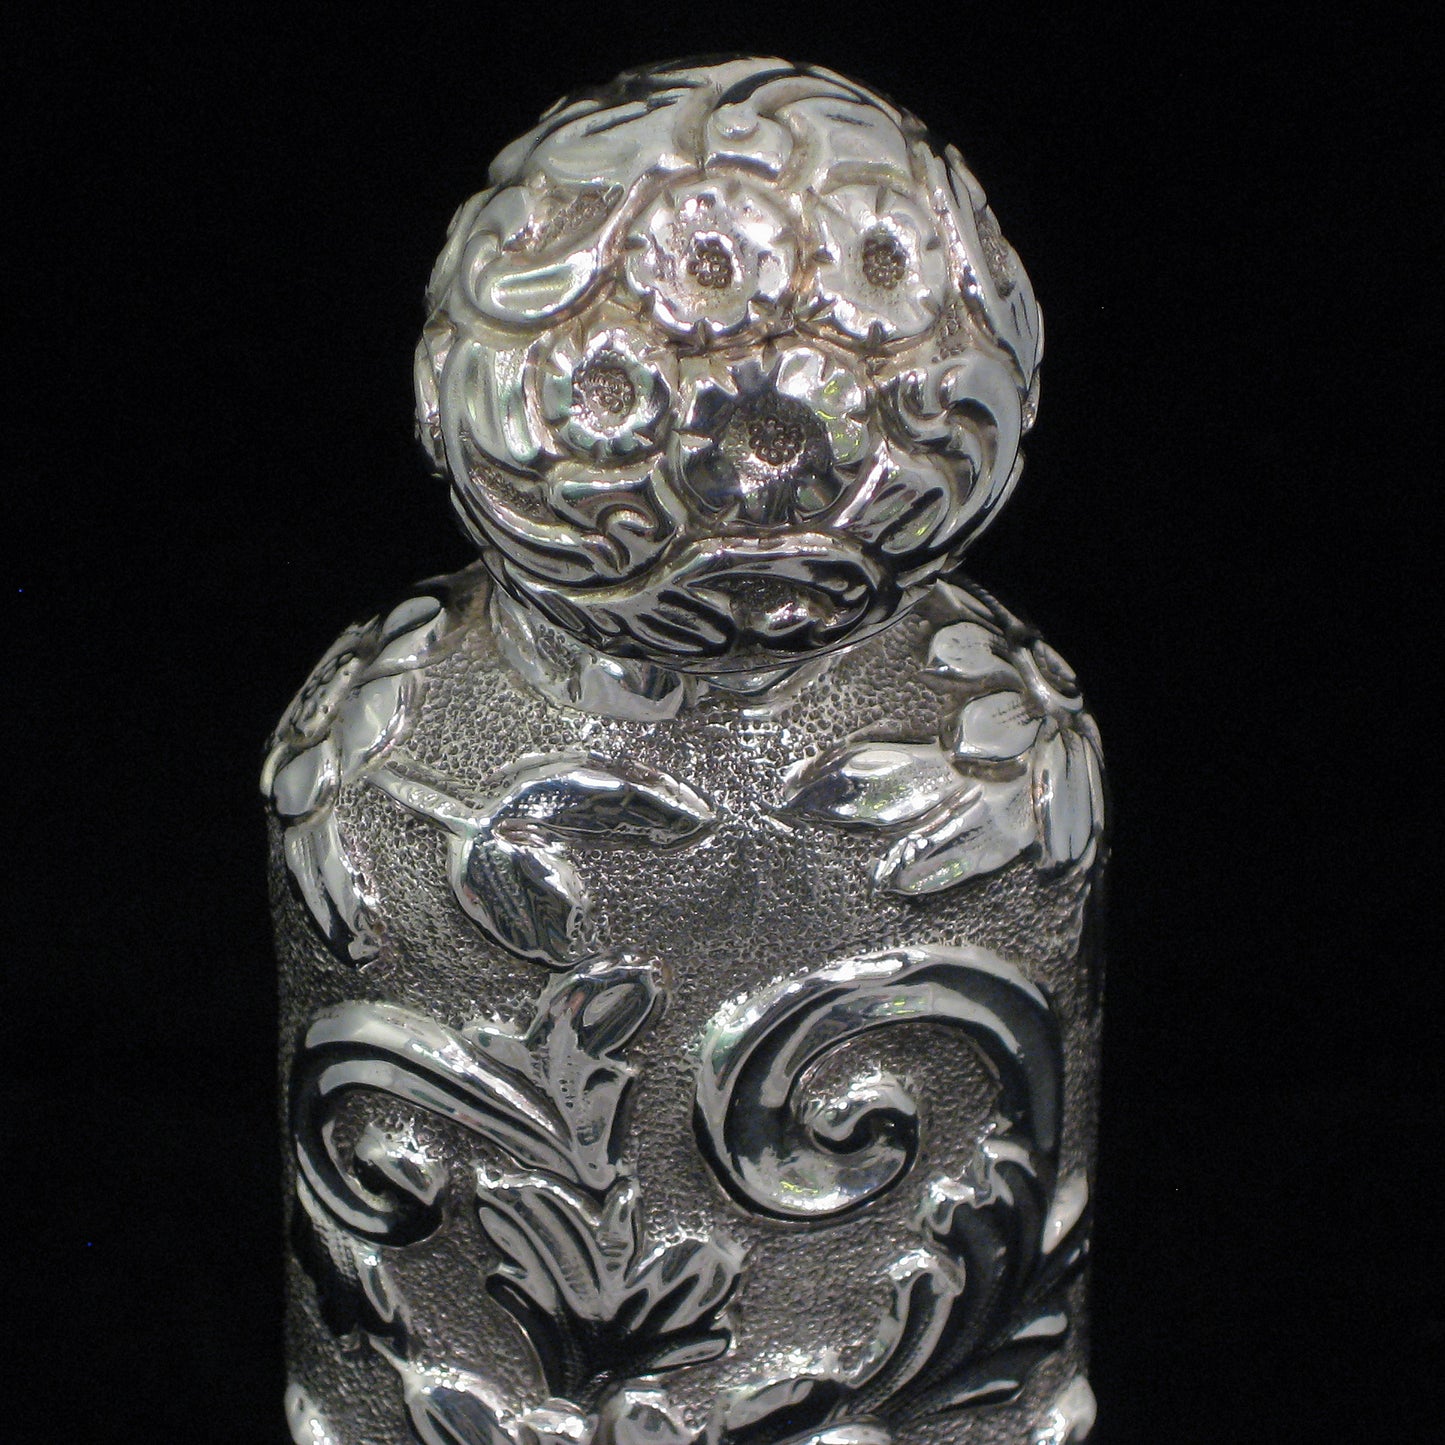 Highly decorative sterling silver perfume bottle.